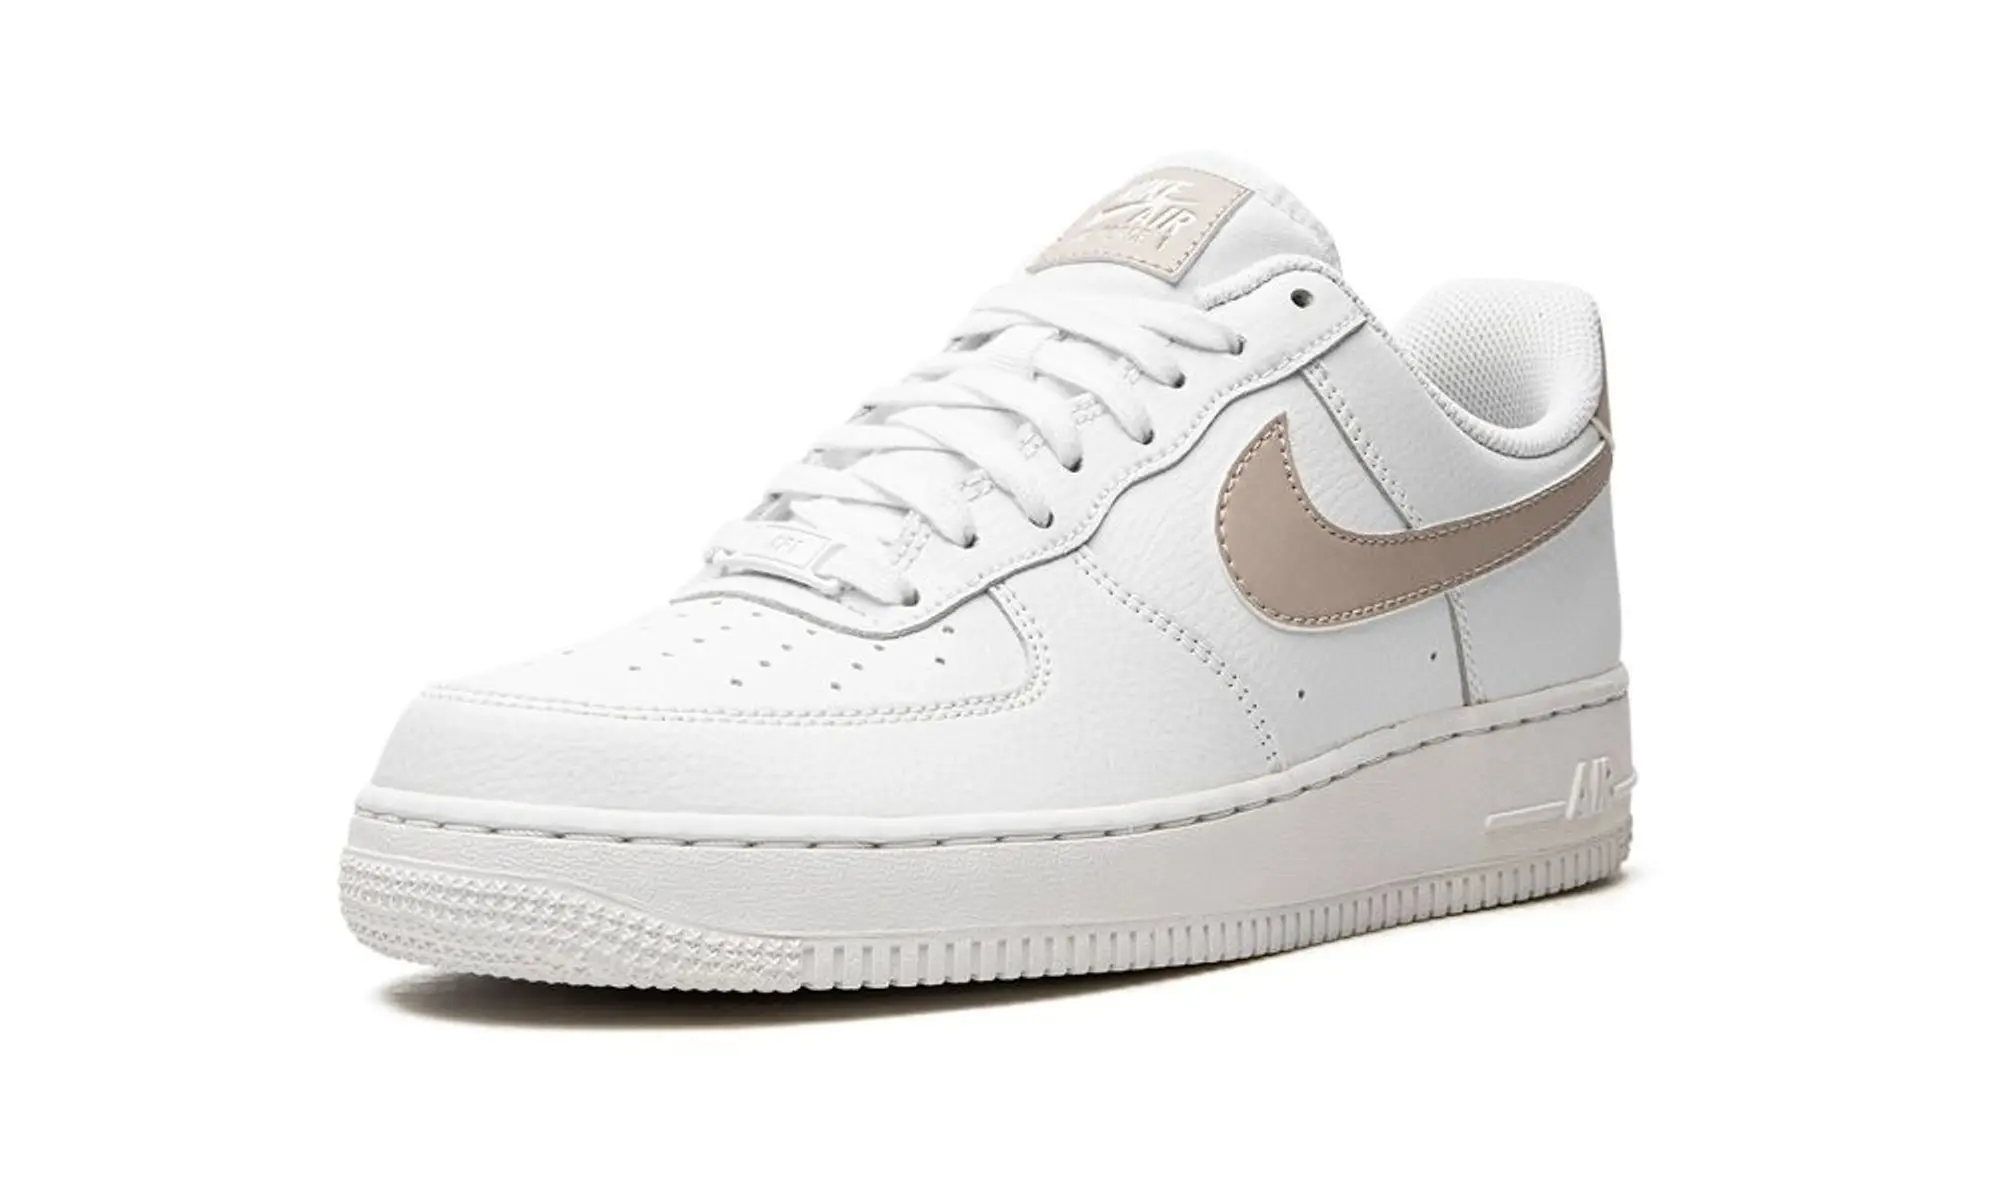 Nike Air Force 1 '07 Low White Fossil Stone (W) Shoes